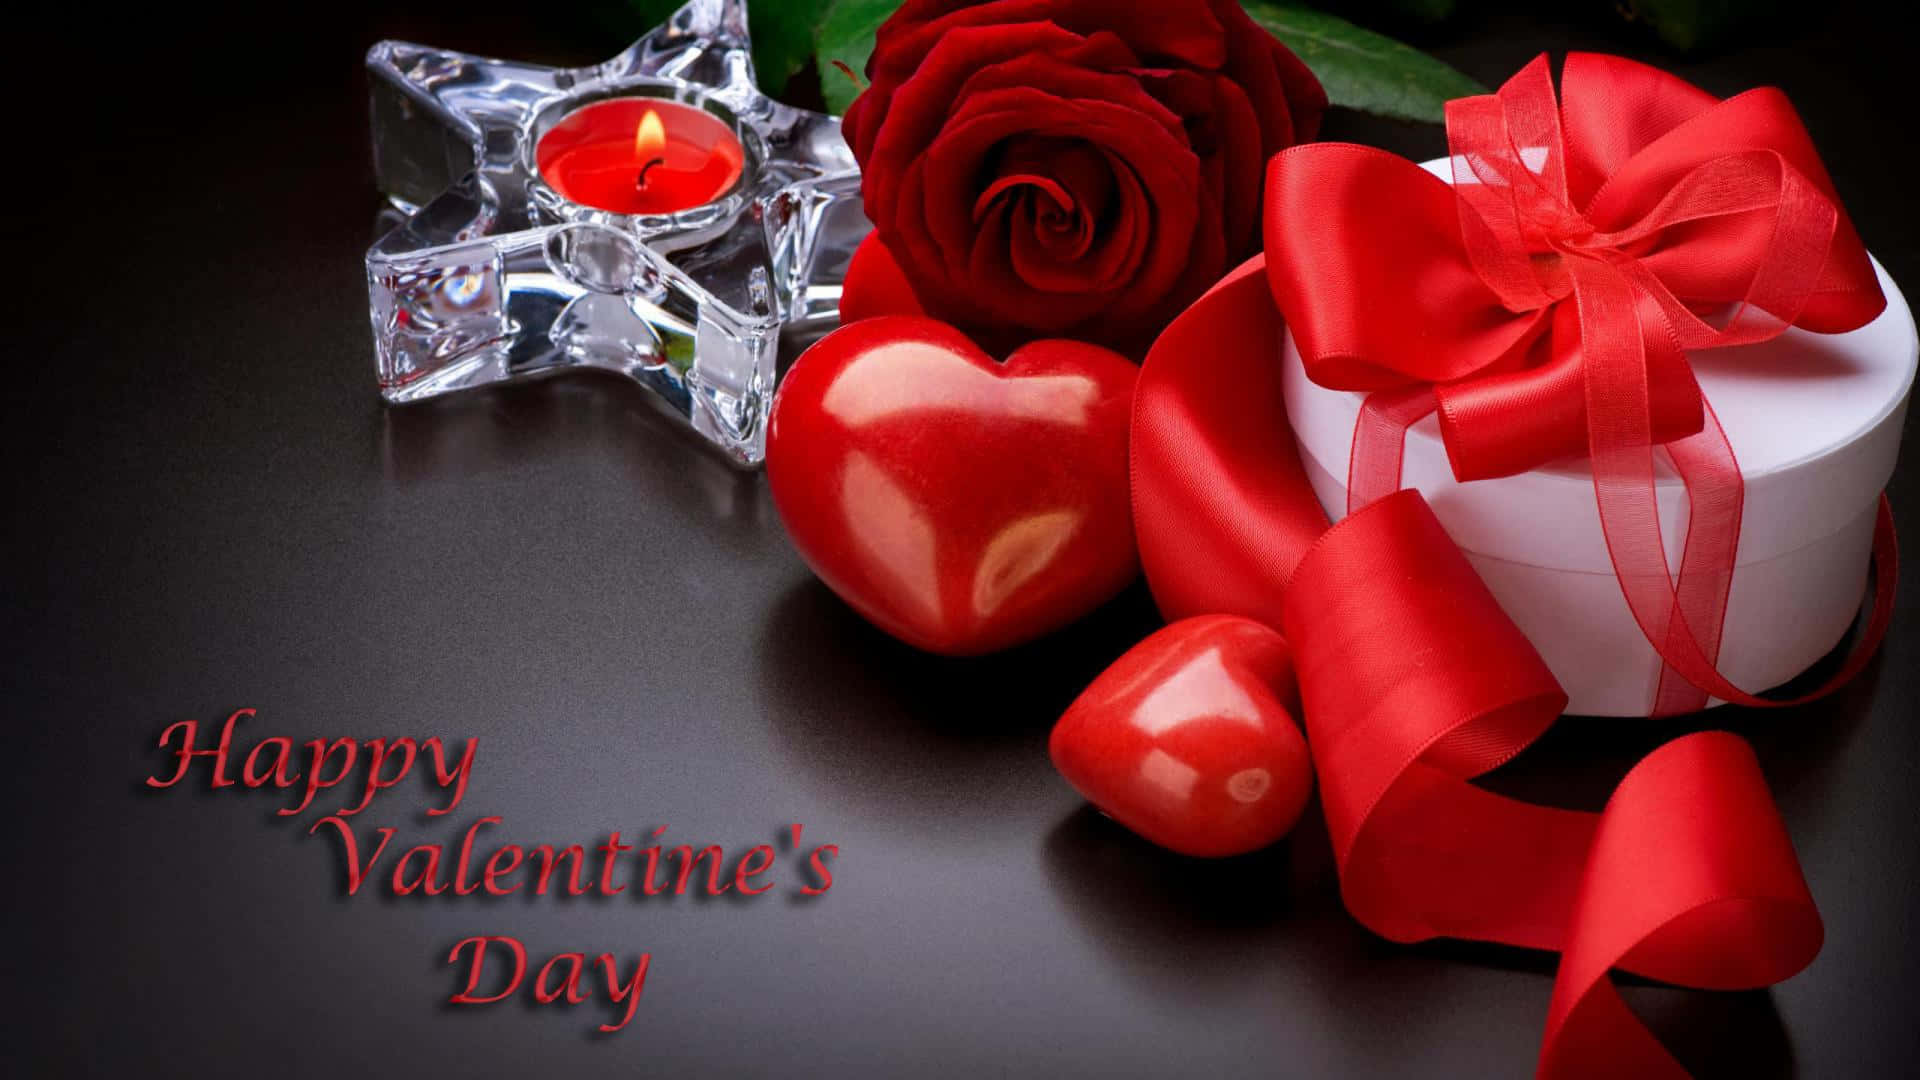 Download Happy Valentine's Day Images | Wallpapers.com